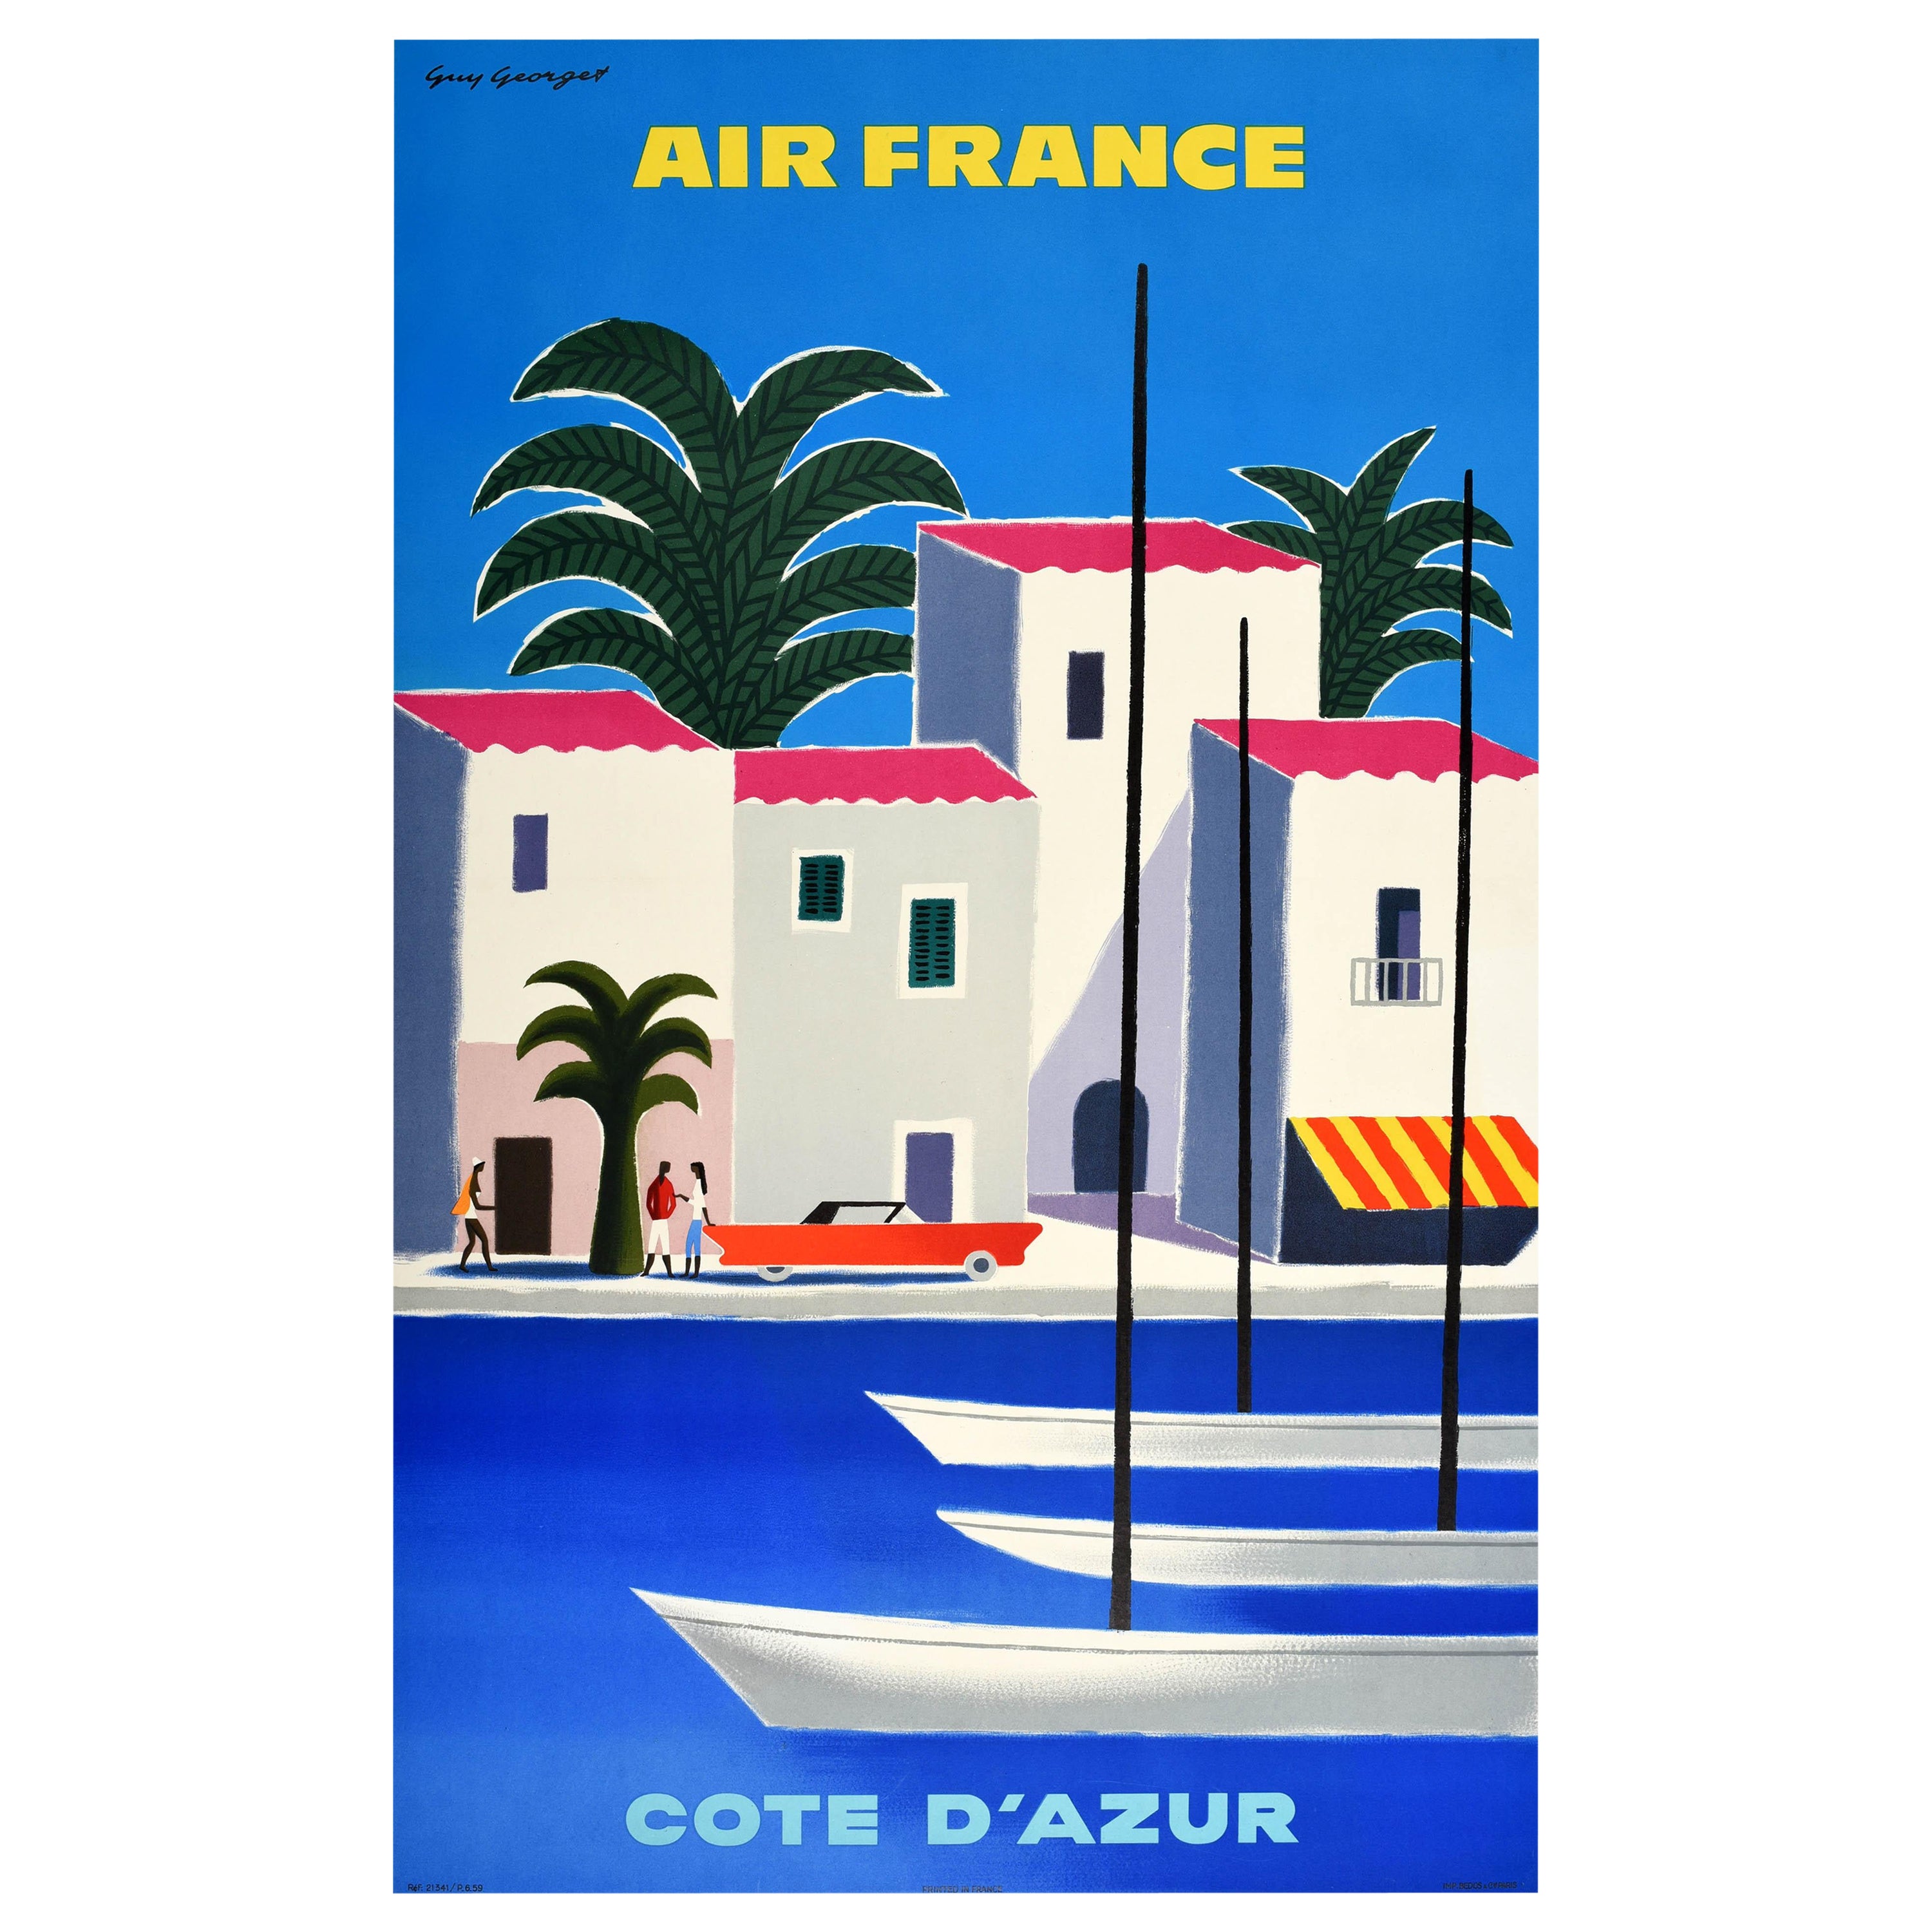 Original Vintage Travel Advertising Poster Air France Cote D'Azur French Riviera